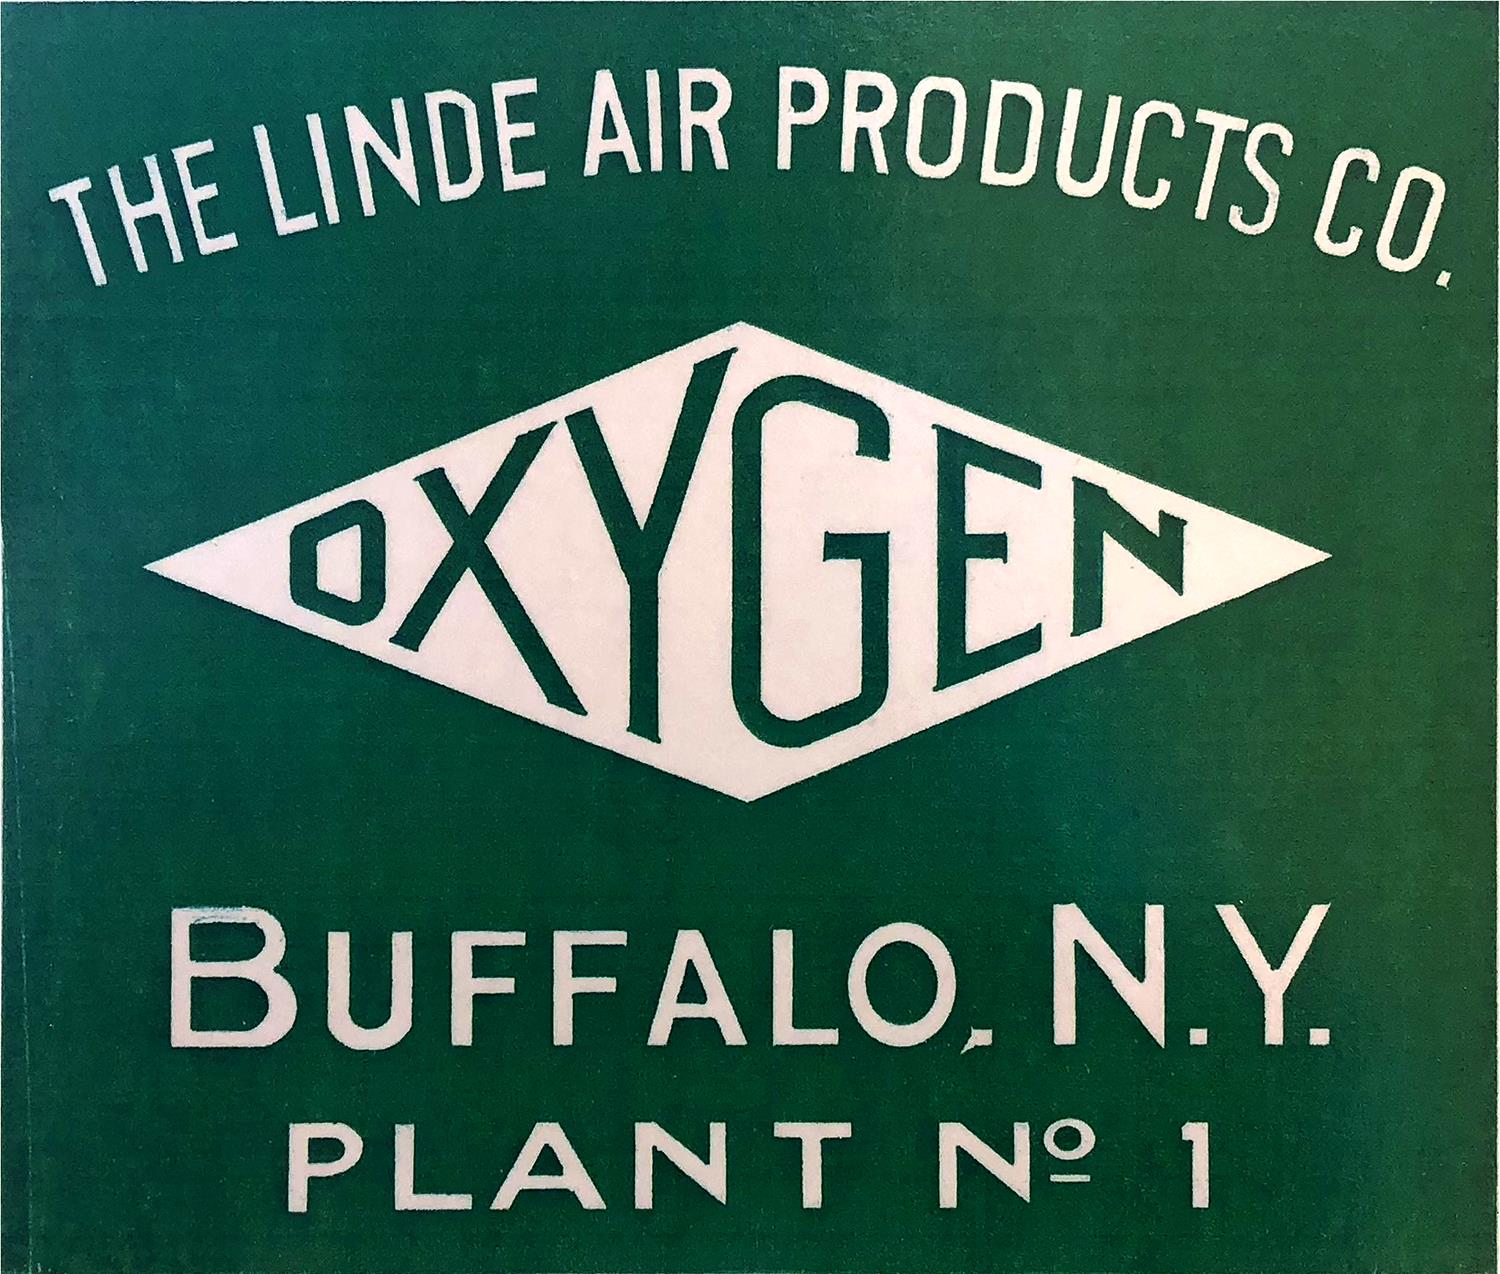 Linde Air Products Co. Oxygen